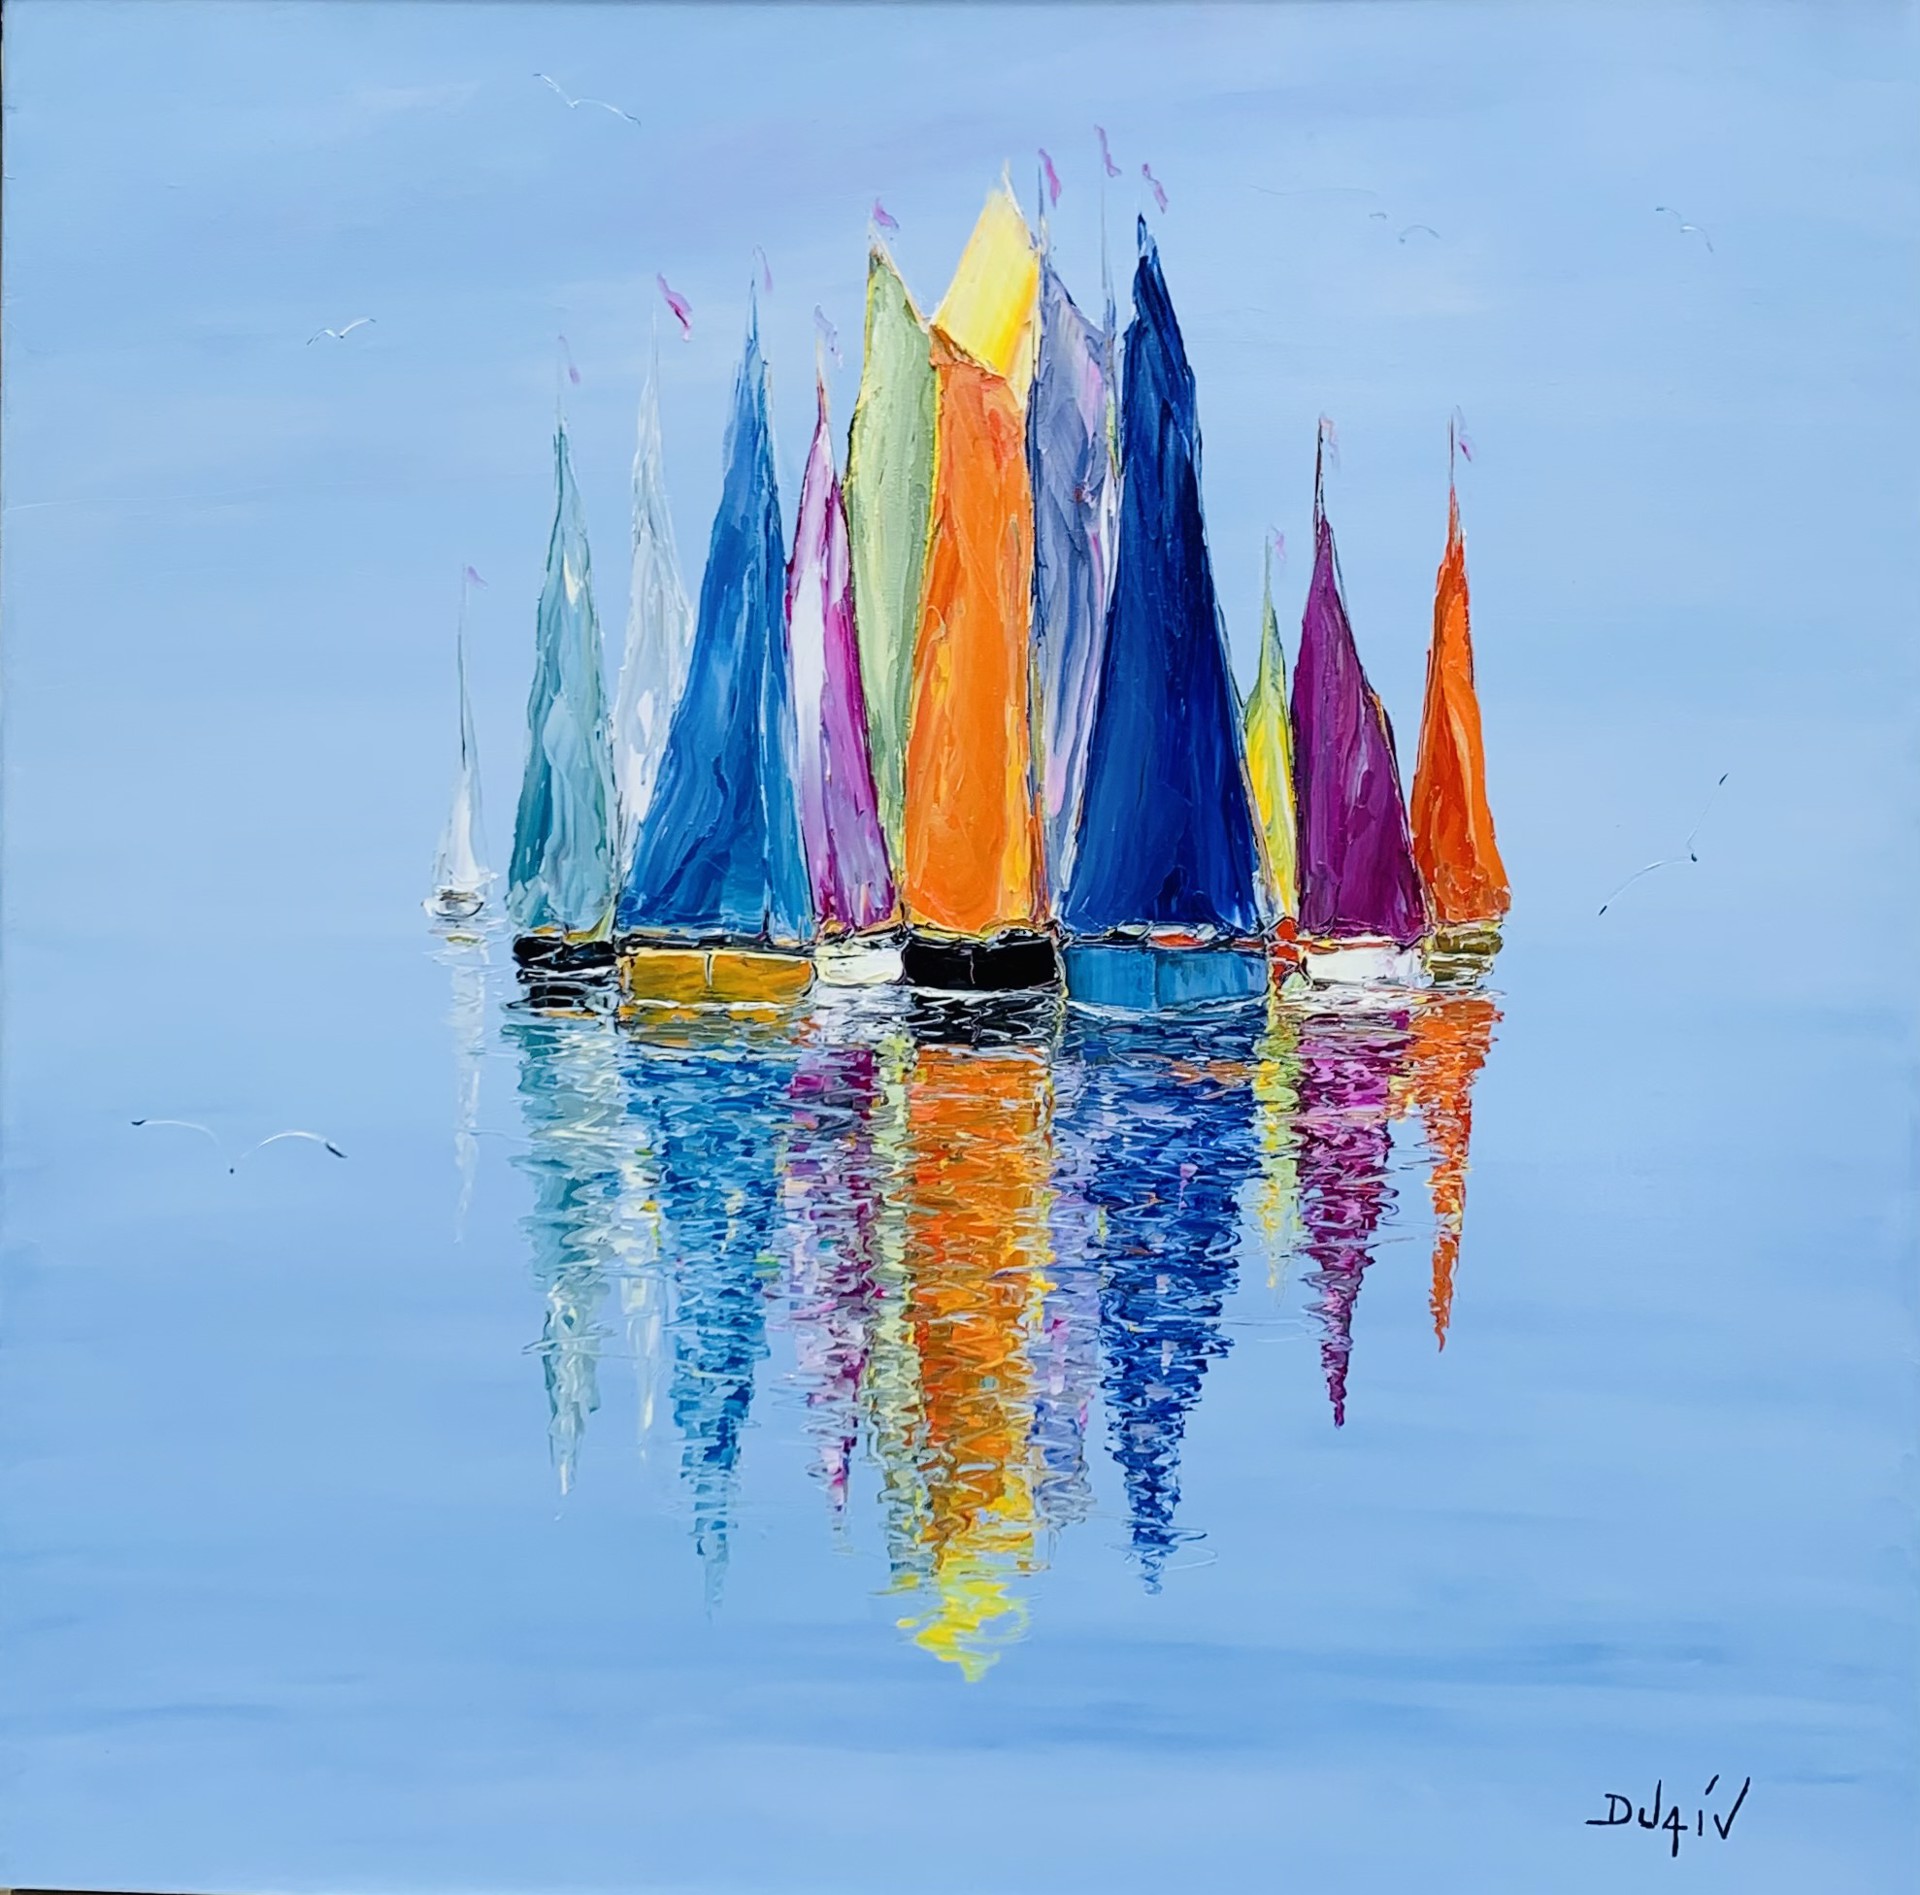 Sails on the Blue by Duaiv